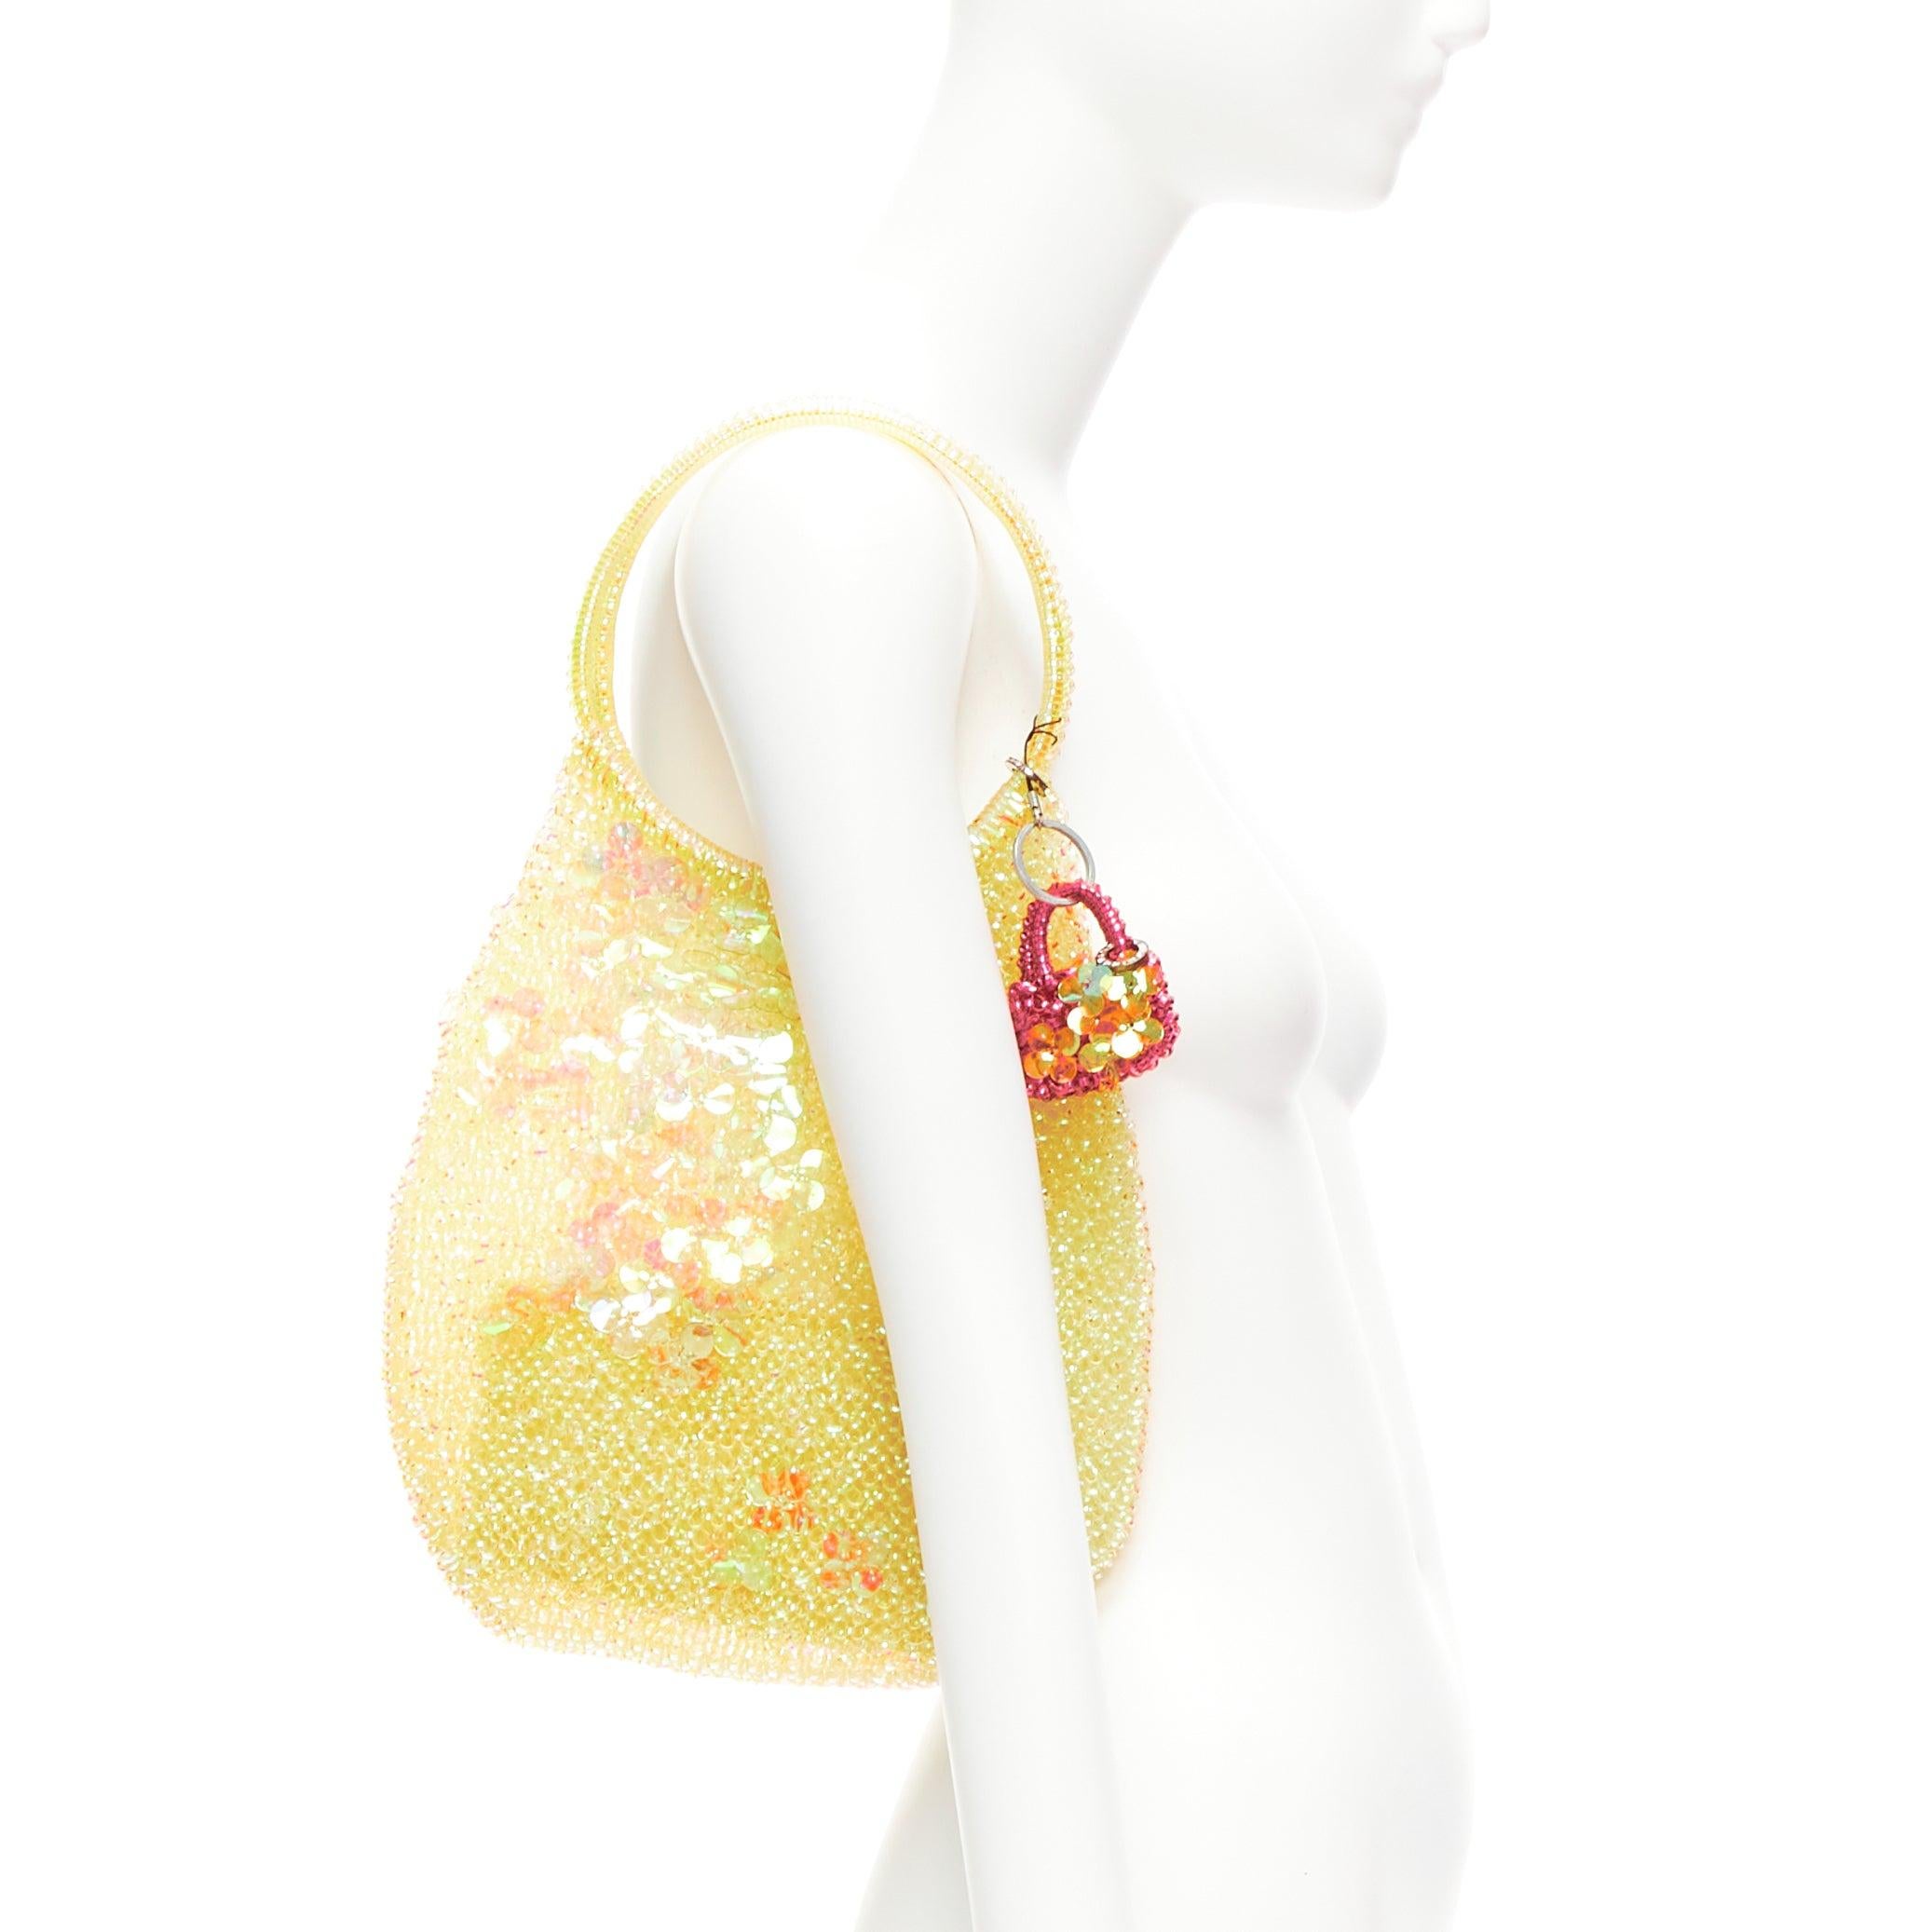 ANTEPRIMA Wire Bag iridescent floral sequins micro charm teardrop tote
Reference: ANWU/A01071
Brand: Anteprima
Collection: Wire Bag
Material: Plastic
Color: Gold, Pink
Pattern: Floral
Extra Details: Pink mini bag phone charm